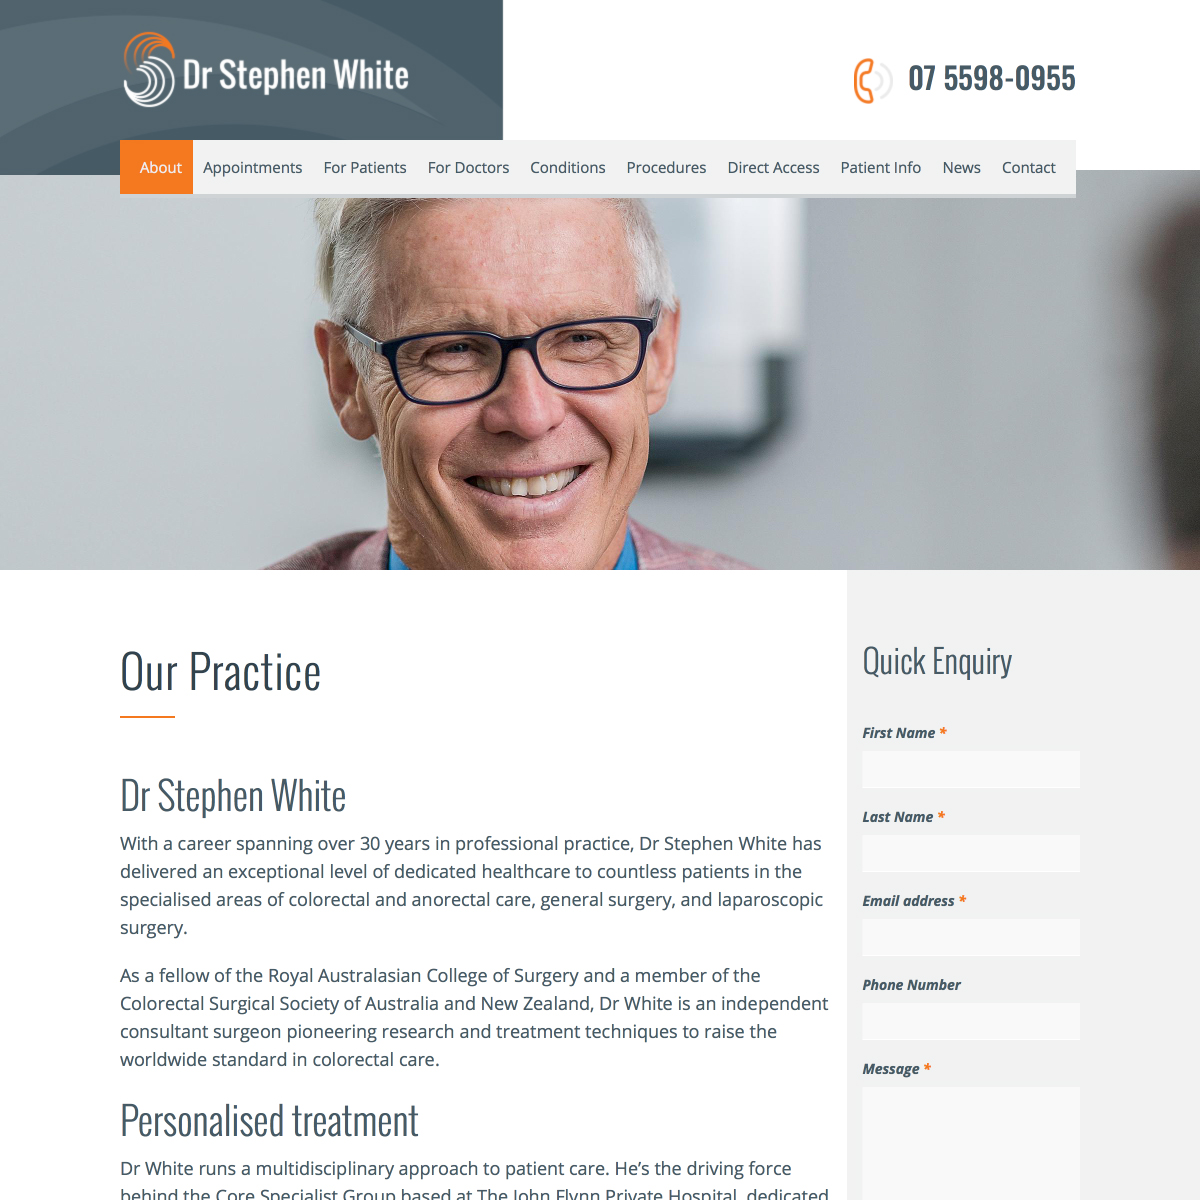 Dr Stephen White - Our Practice